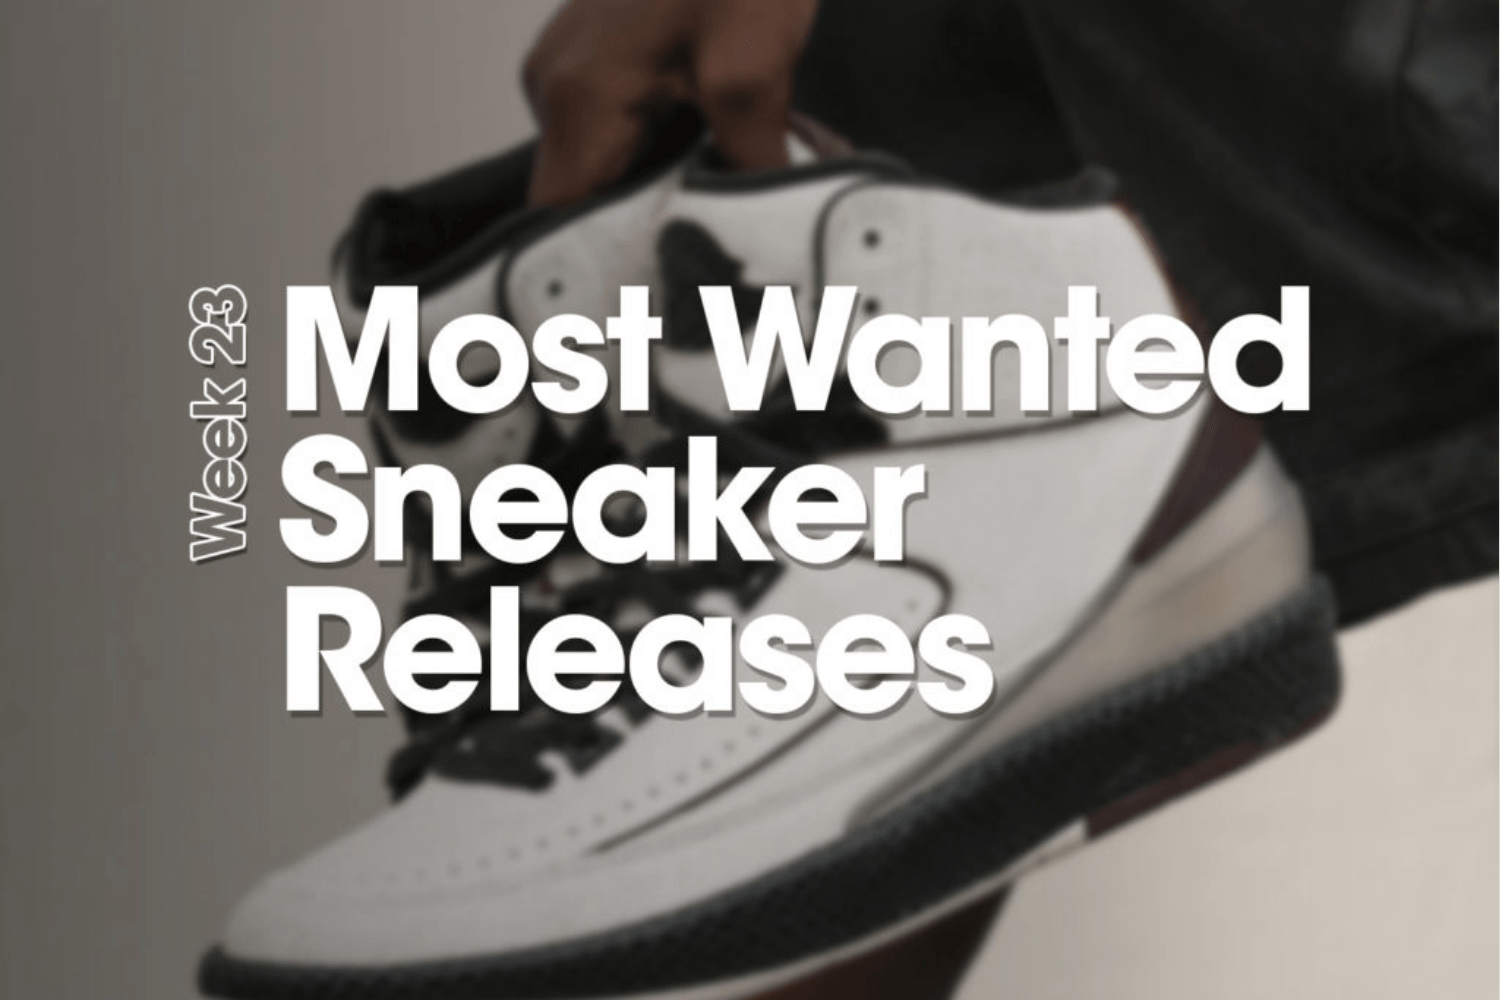 Die 'Most Wanted Sneaker Releases' - Woche 23